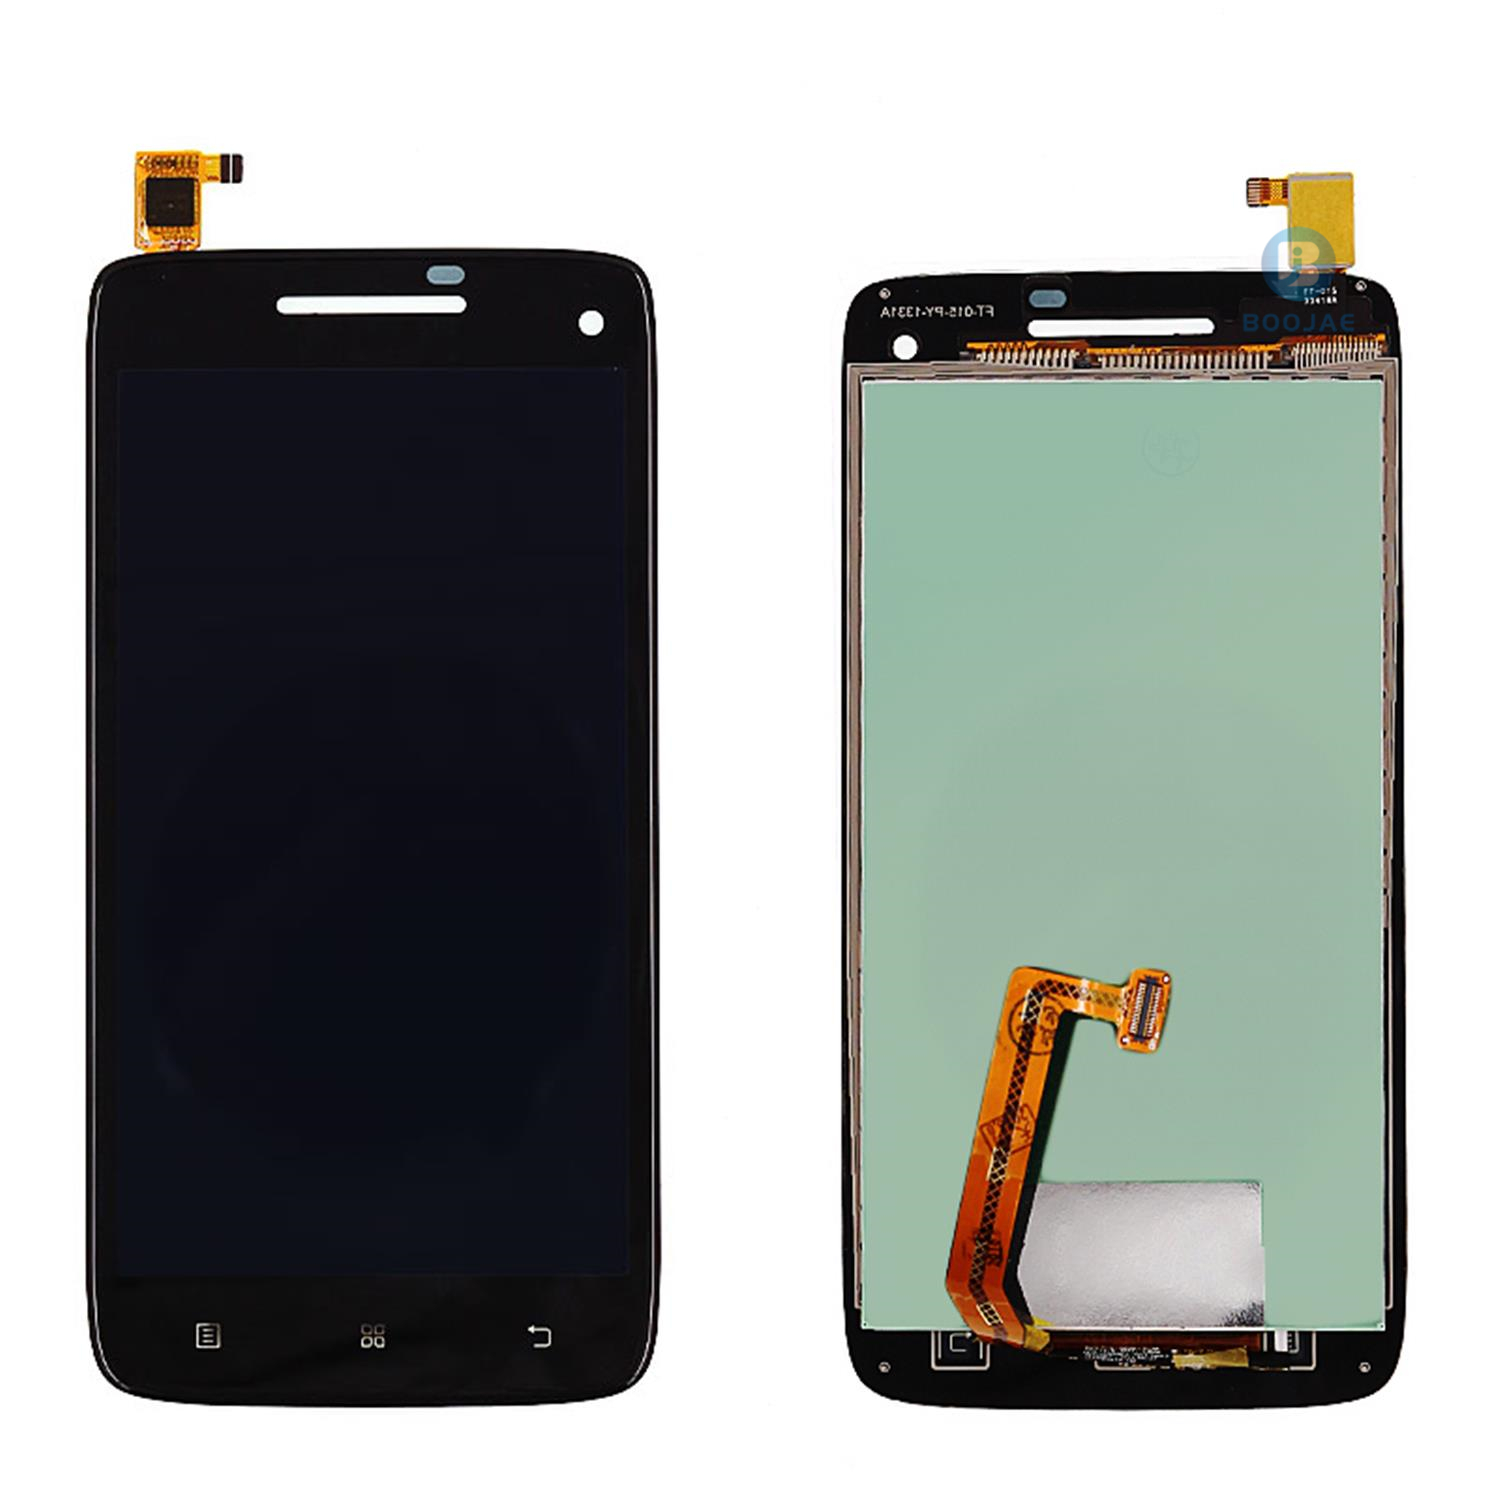 For Lenovo S960 LCD Screen Display and Touch Panel Digitizer Assembly Replacement